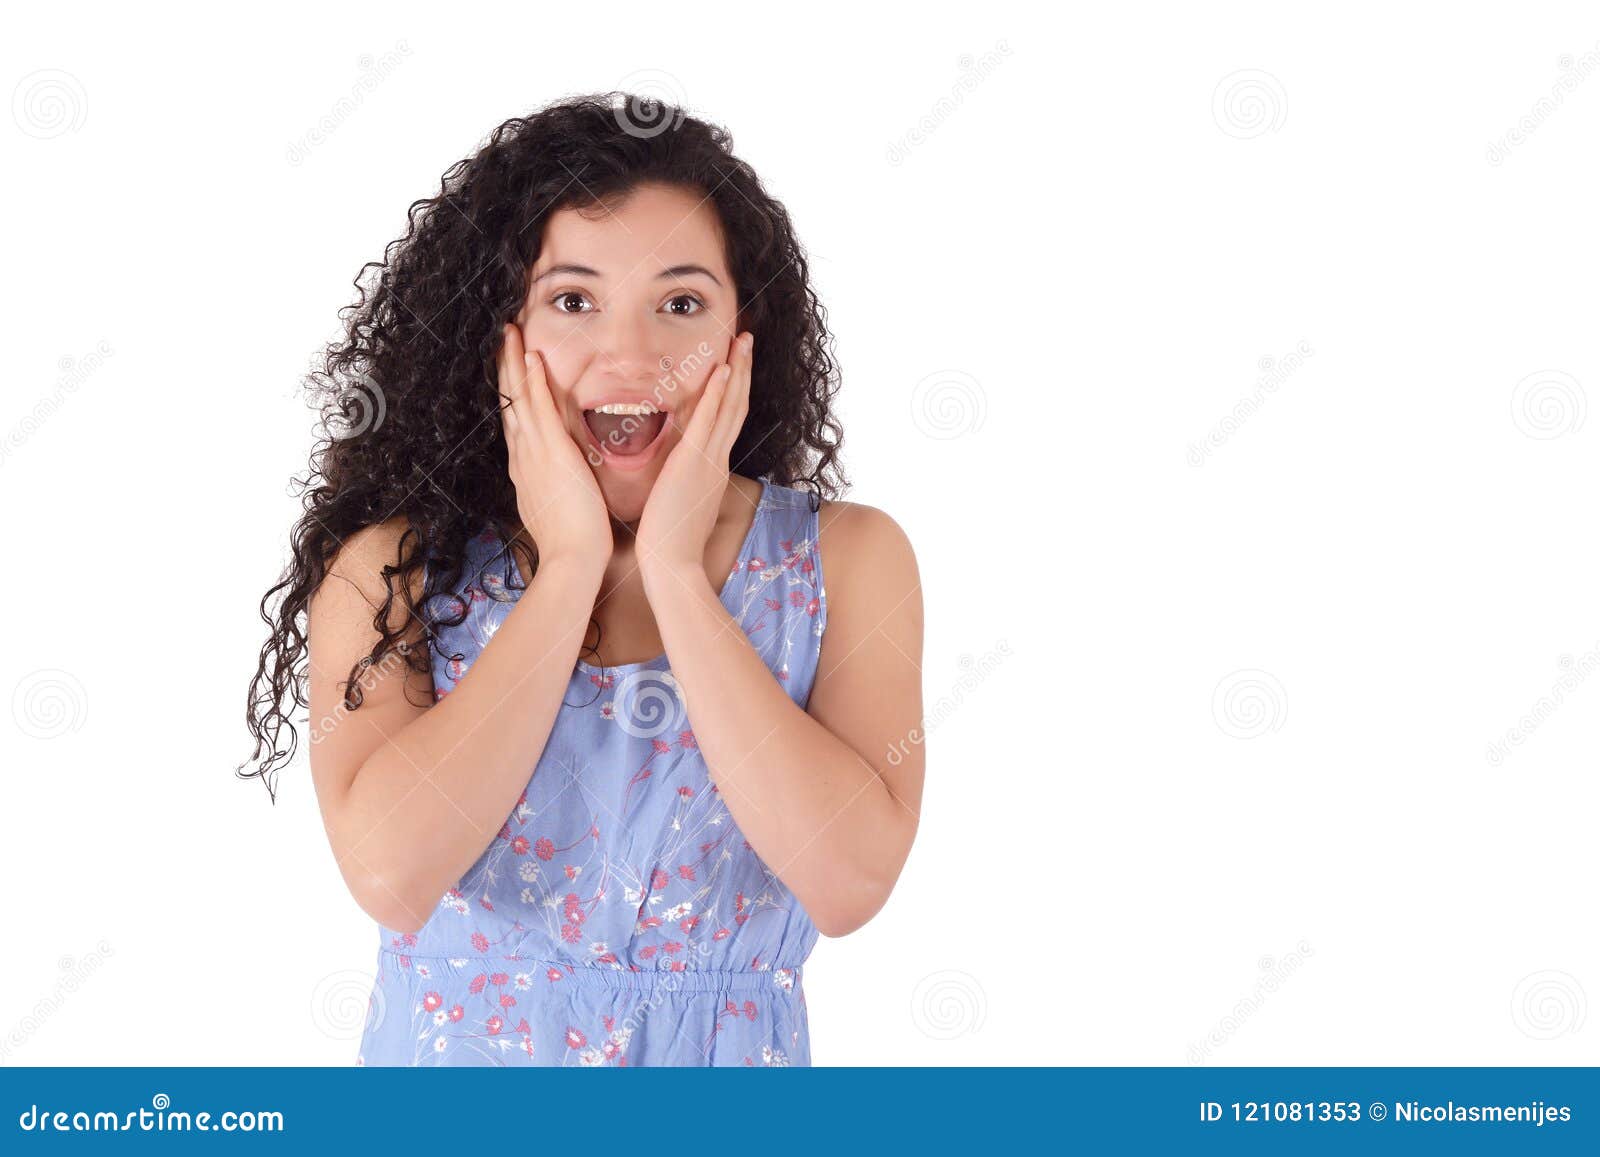 Latin woman surprised stock image. Image of lady, friendly - 121081353